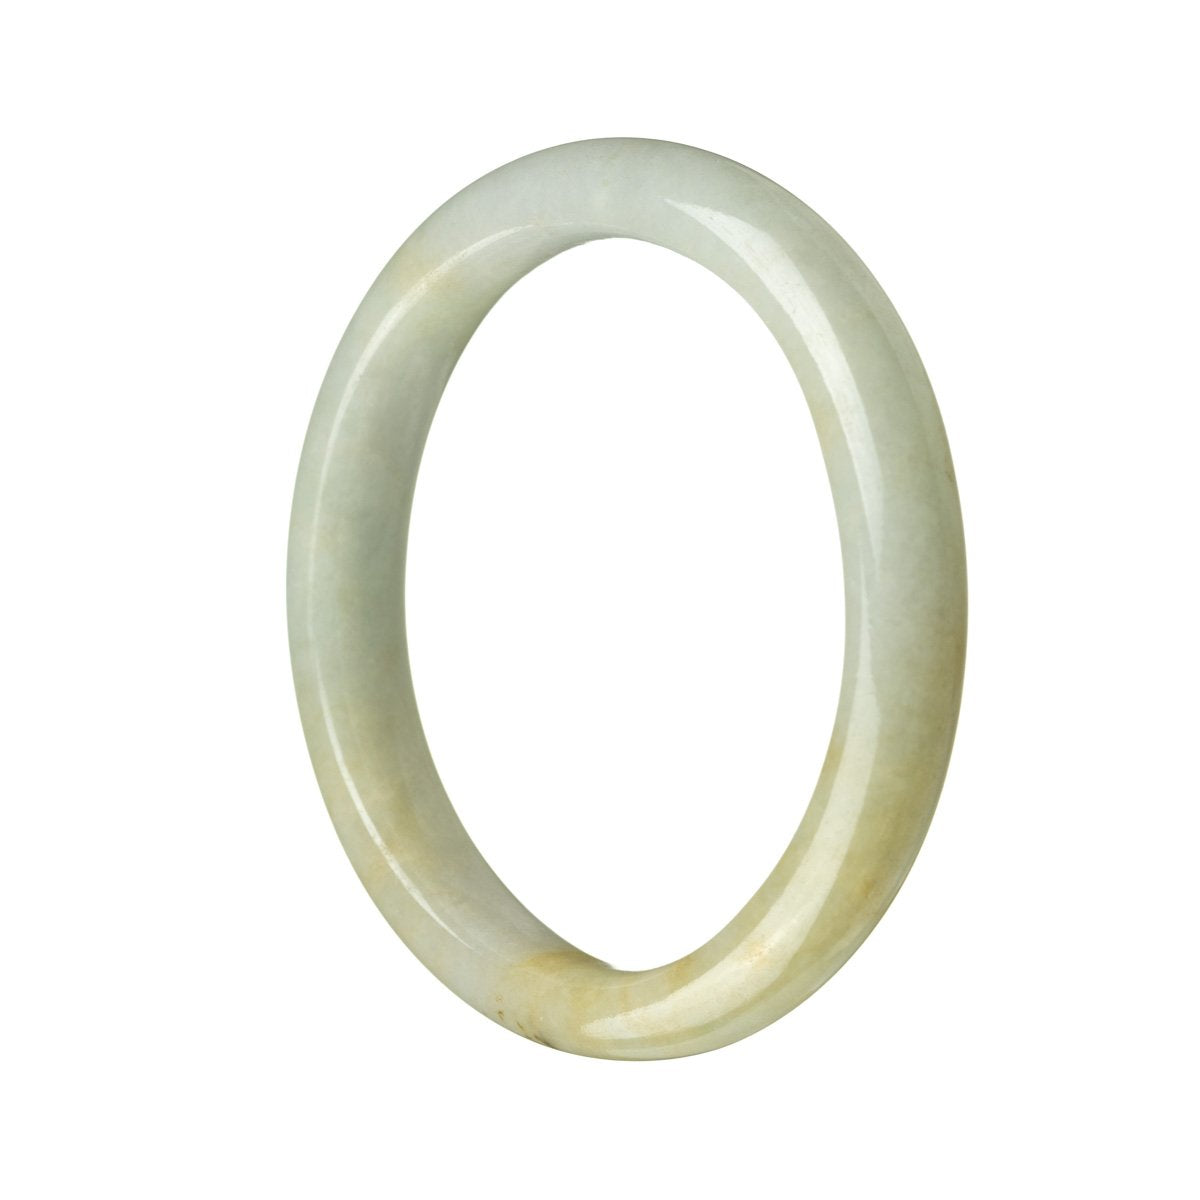 A close-up image of a grey jadeite bangle bracelet. The bracelet is certified Type A and is made of semi-round jadeite beads. The bracelet has a diameter of 57mm and is designed by MAYS™.